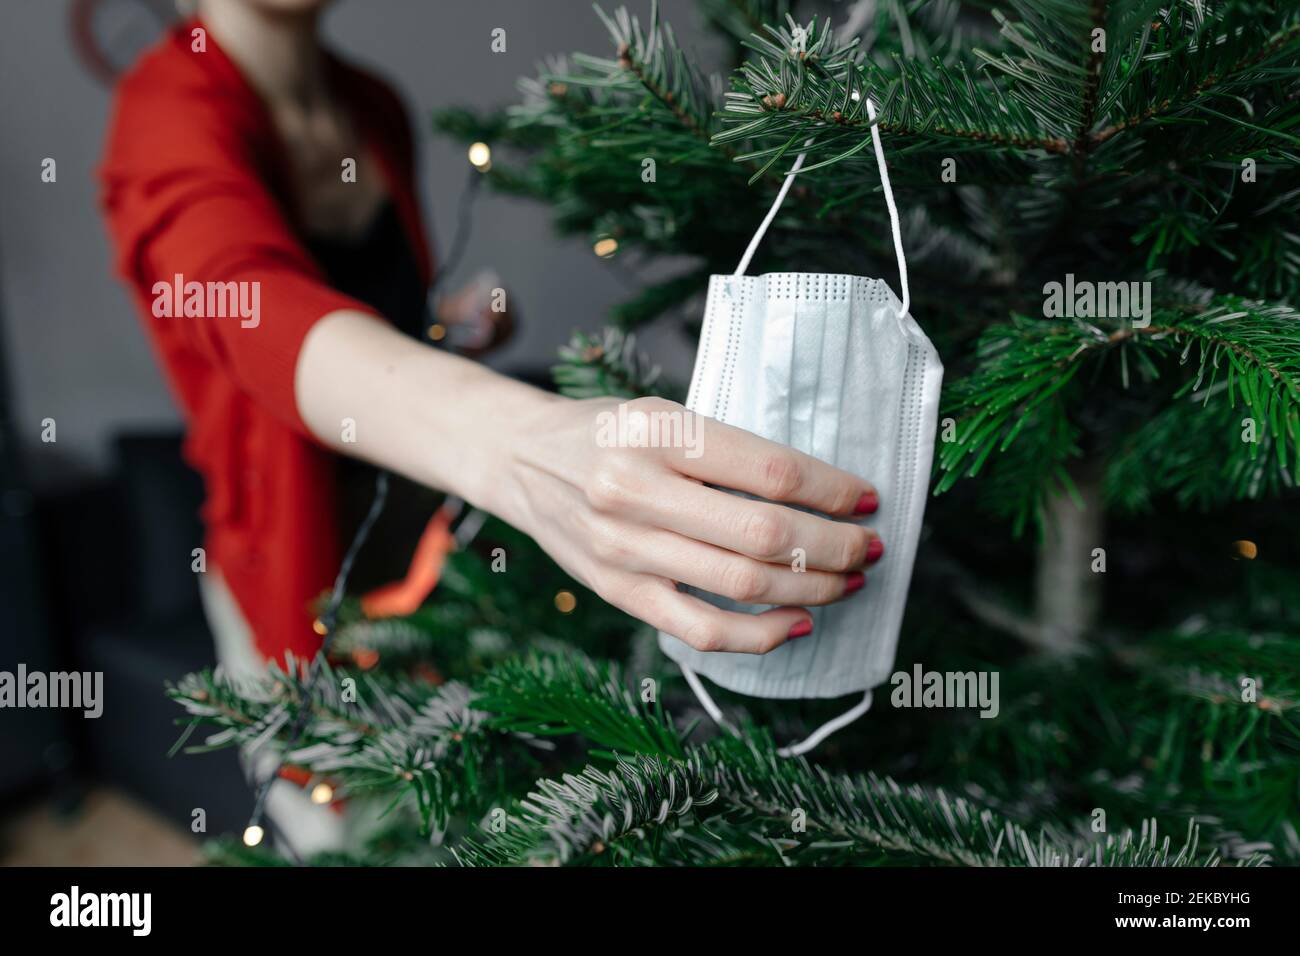 Woman's hand holding protective face mask hanged on Christmas tree at home Stock Photo